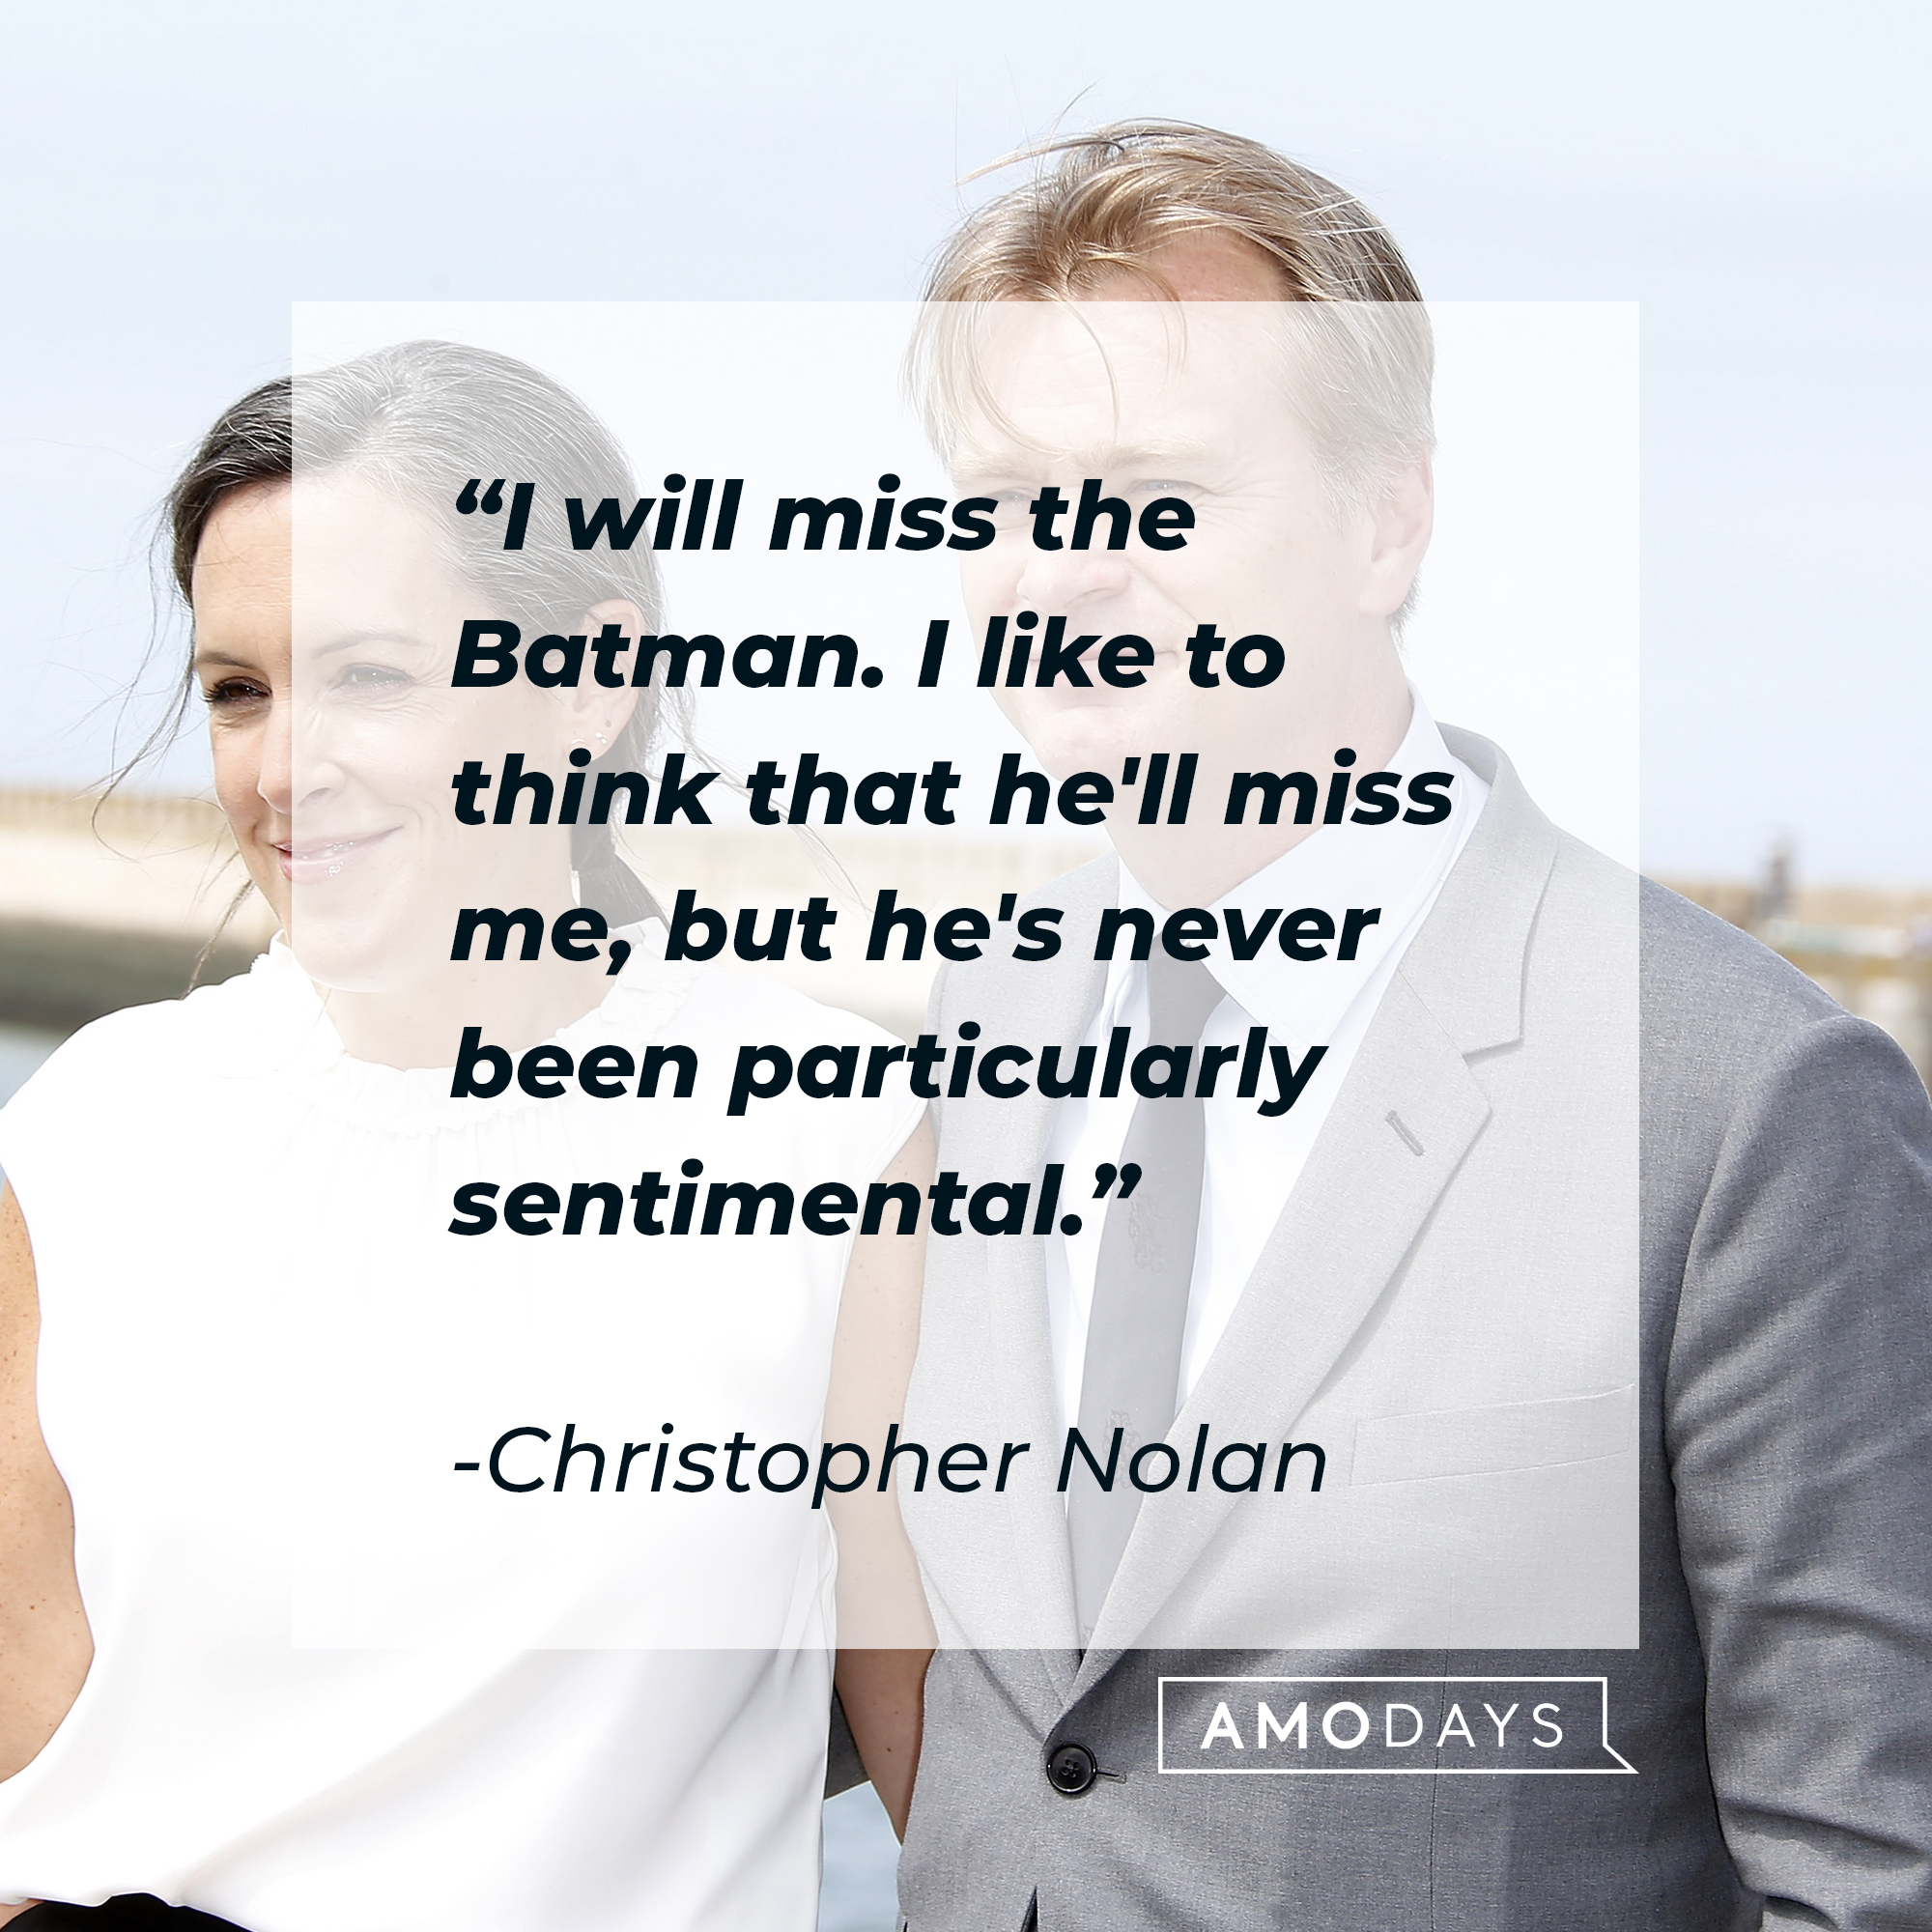 Christopher Nolan, with his quote: “I will miss the Batman. I like to think that he'll miss me, but he's never been particularly sentimental.” | Source: Getty Images